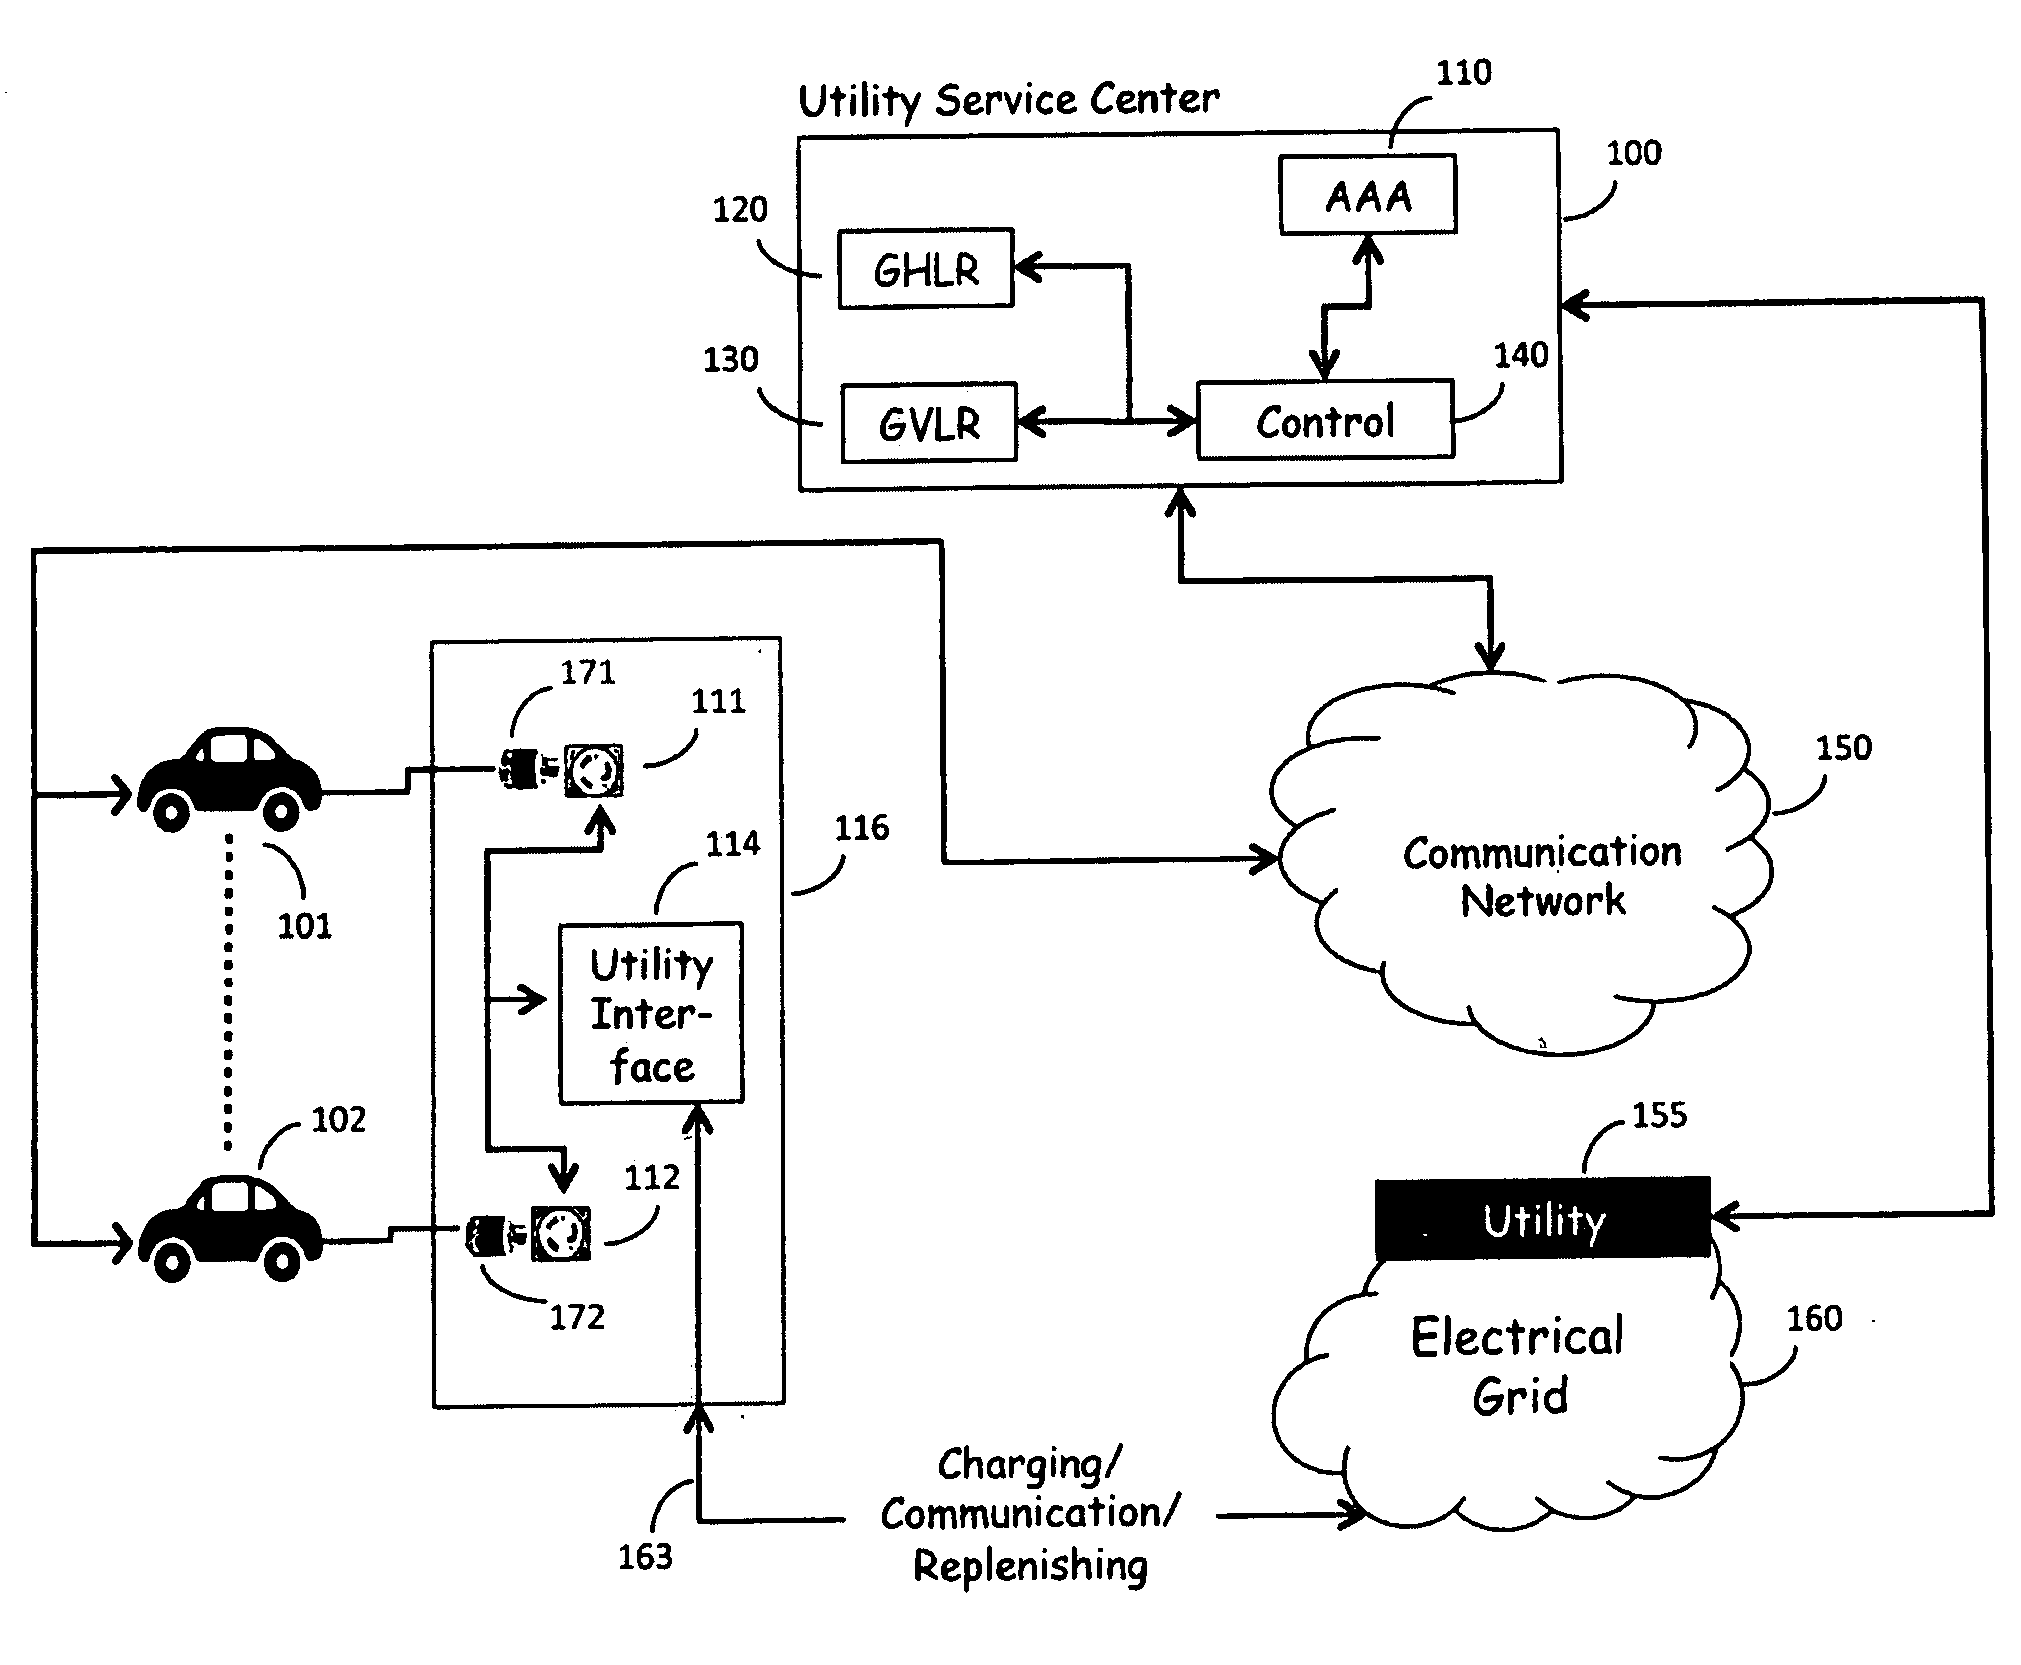 Self-identifying power source for use in recharging vehicles equipped with electrically powered propulsion systems